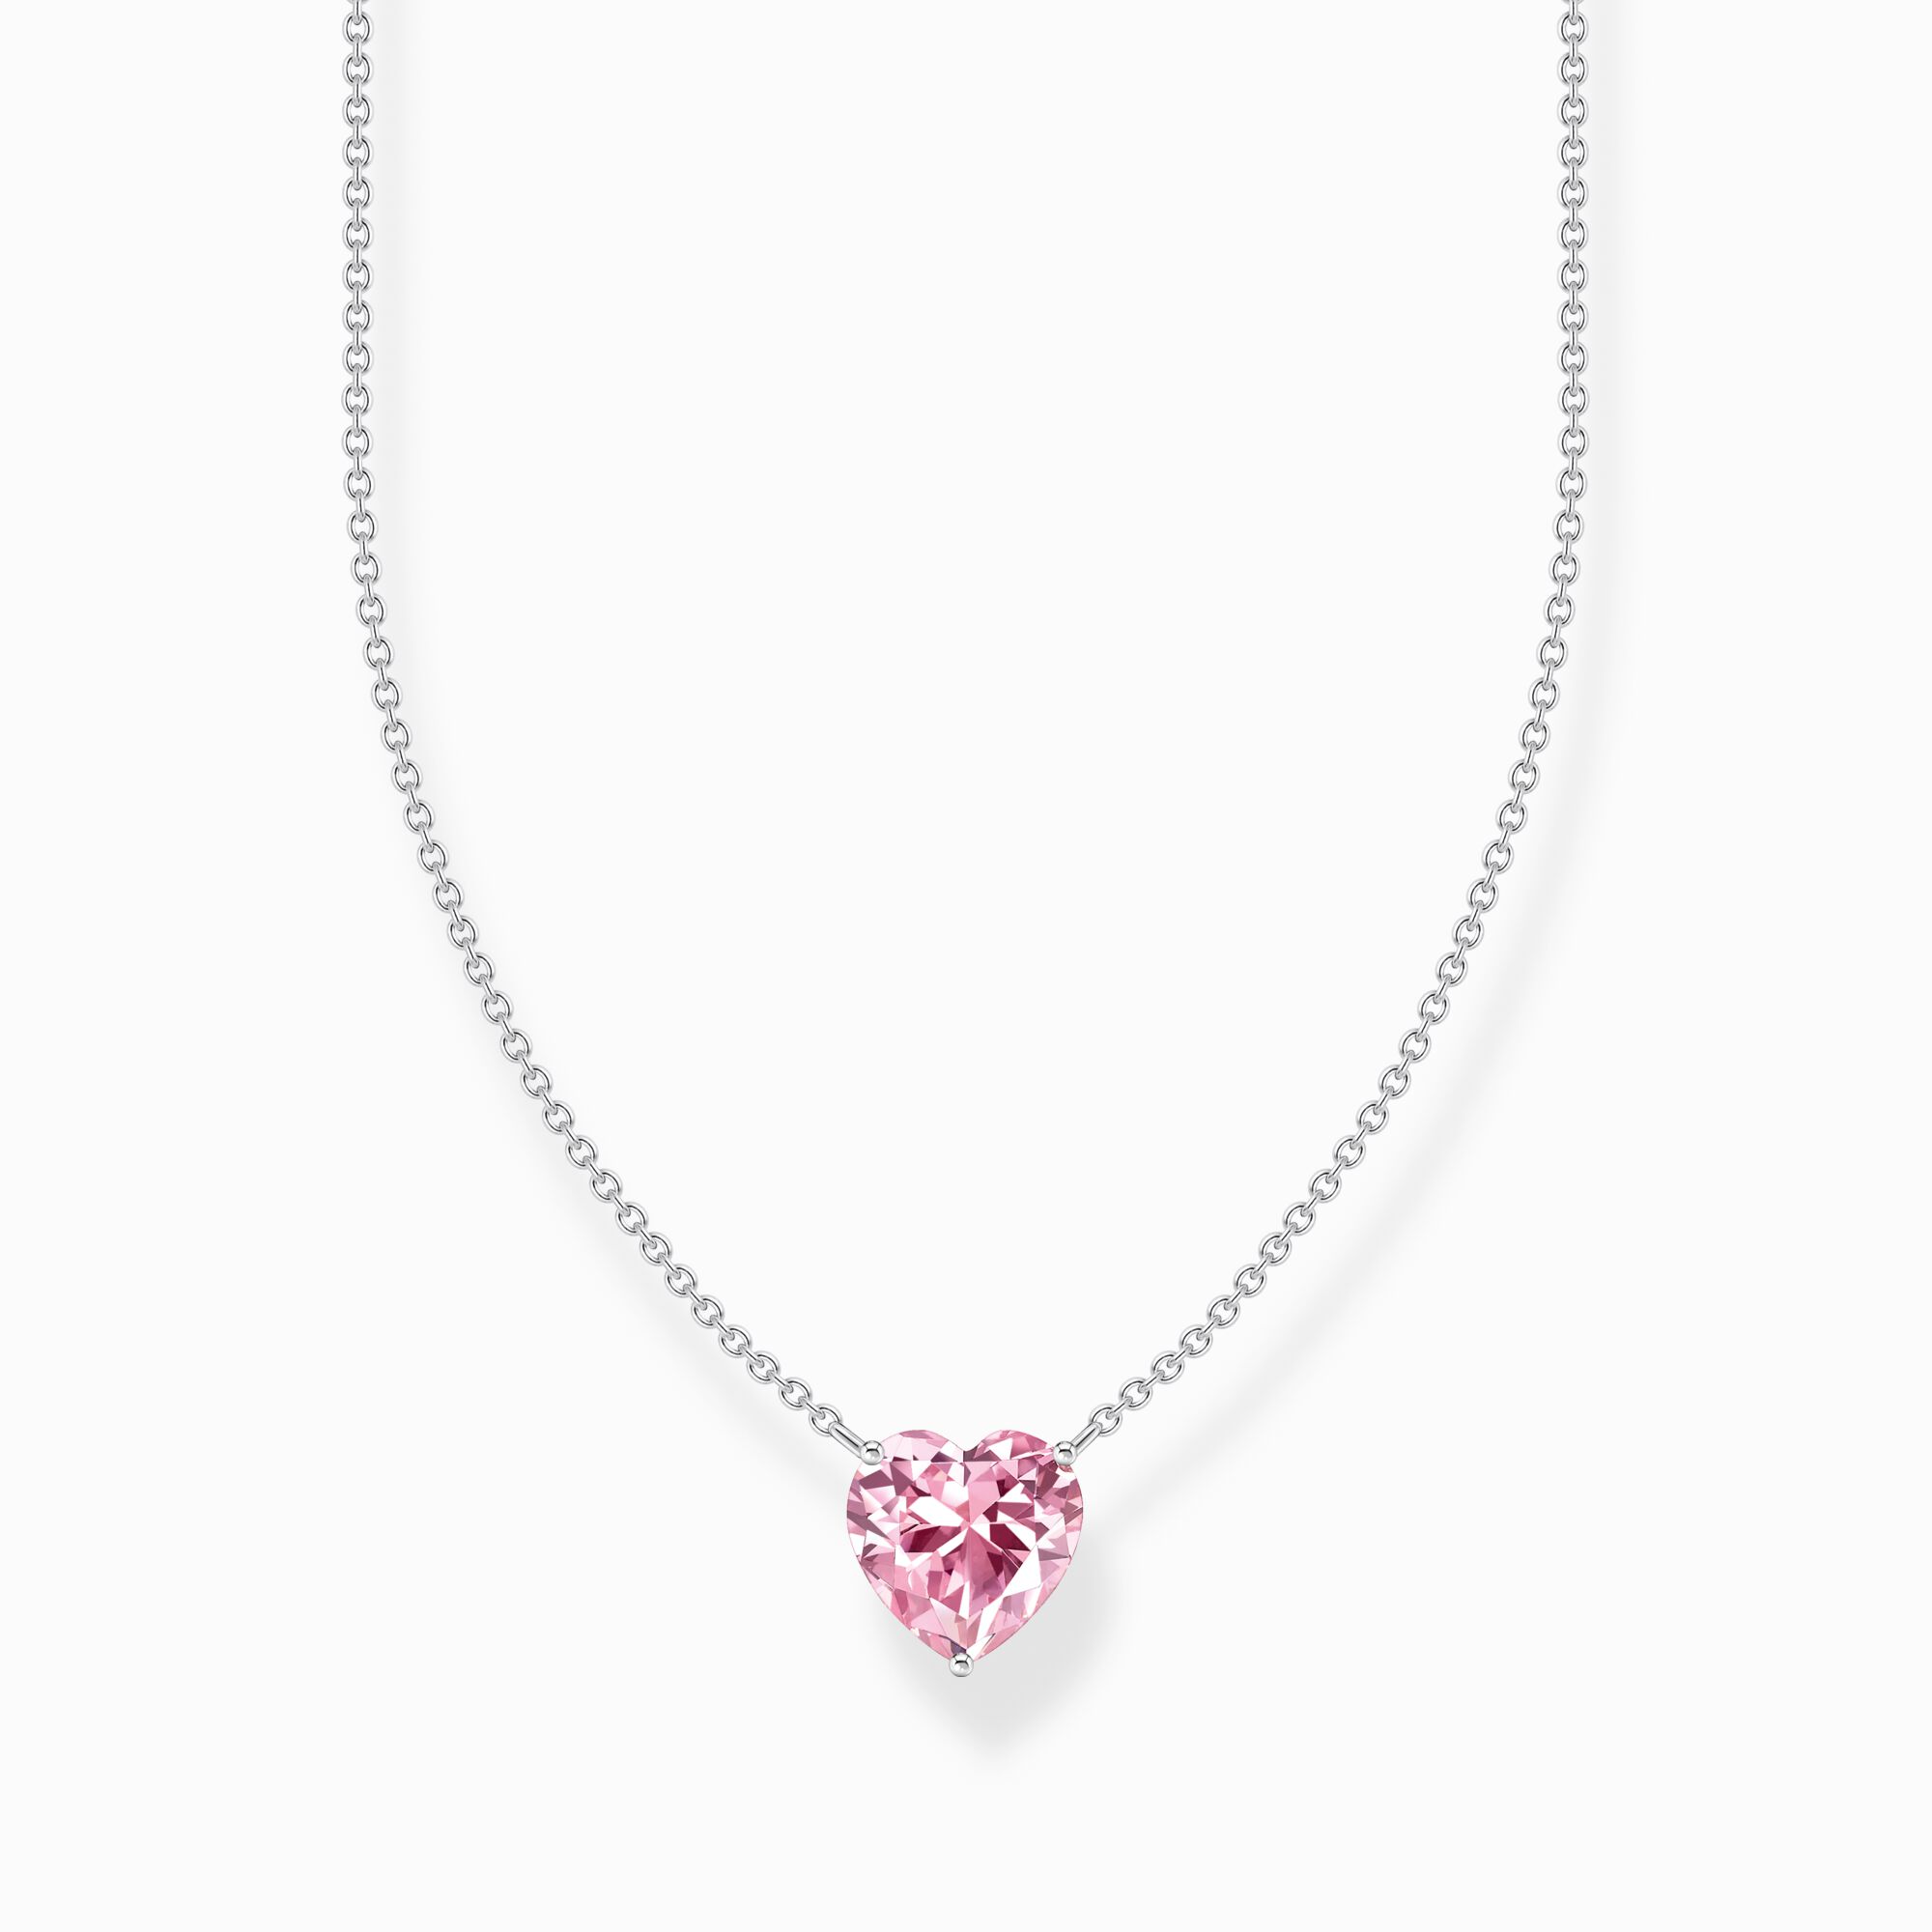 Silver necklace with pink heart-shaped pendant from the  collection in the THOMAS SABO online store